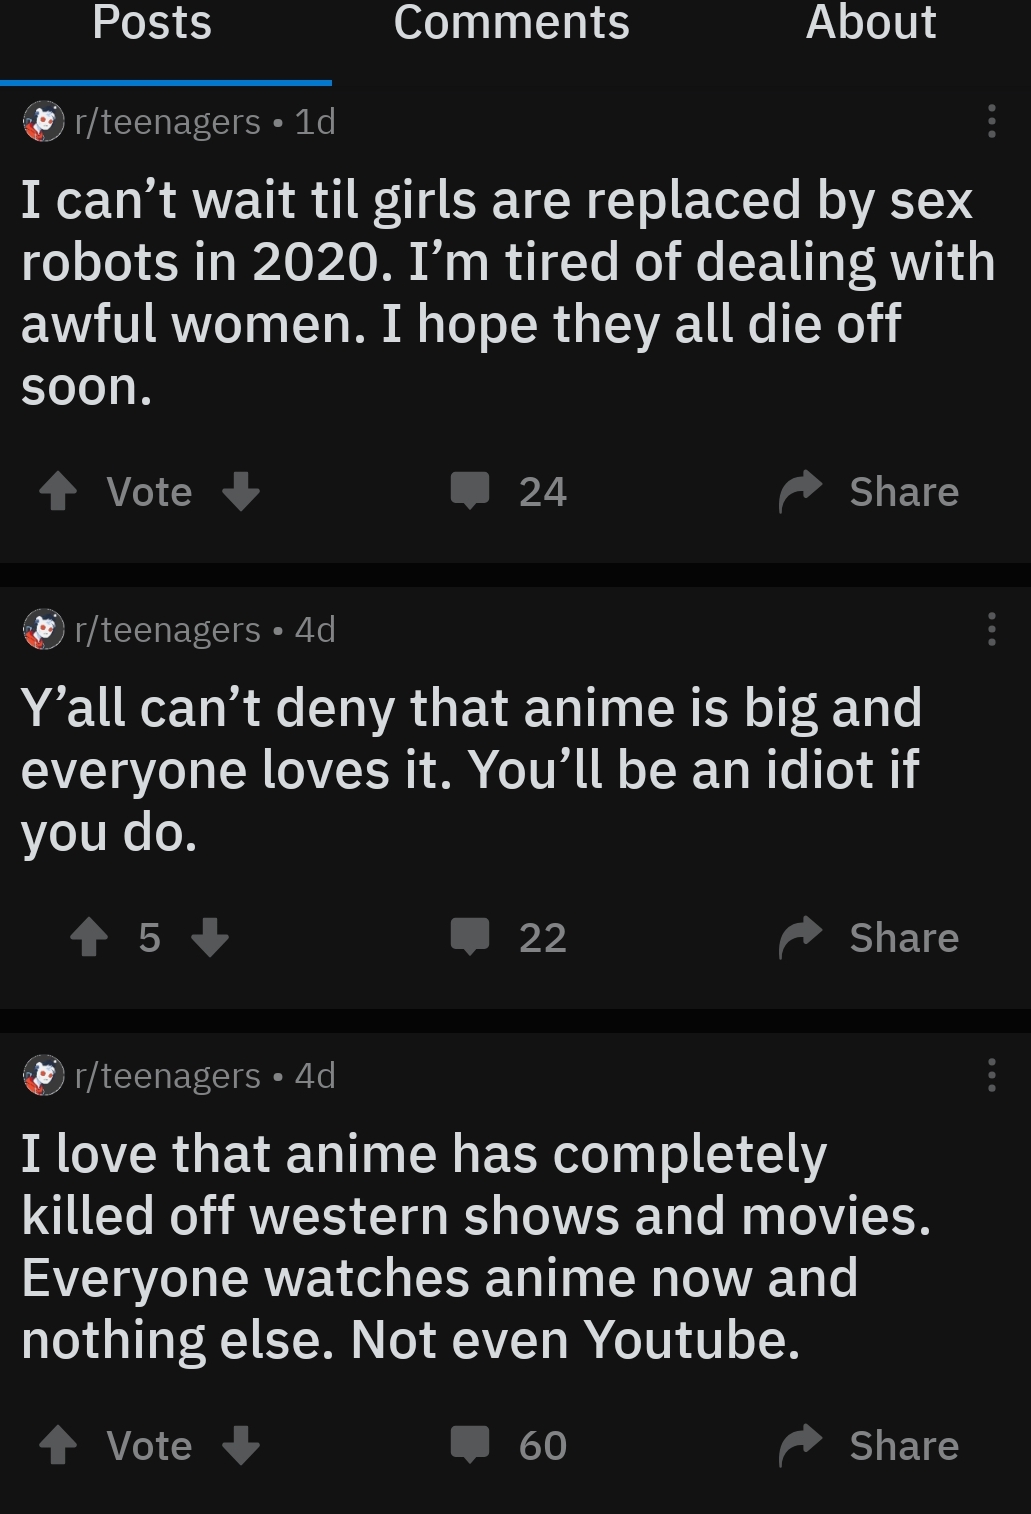 Posts About serteenagers 10 I can't wait til girls are replaced by sex robots in 2020. I'm tired of dealing with awful women. I hope they all die off soon. 1 Vote 24 erteenagers 4d, Y'all can't deny that anime is big and everyone loves it. You'll be an…